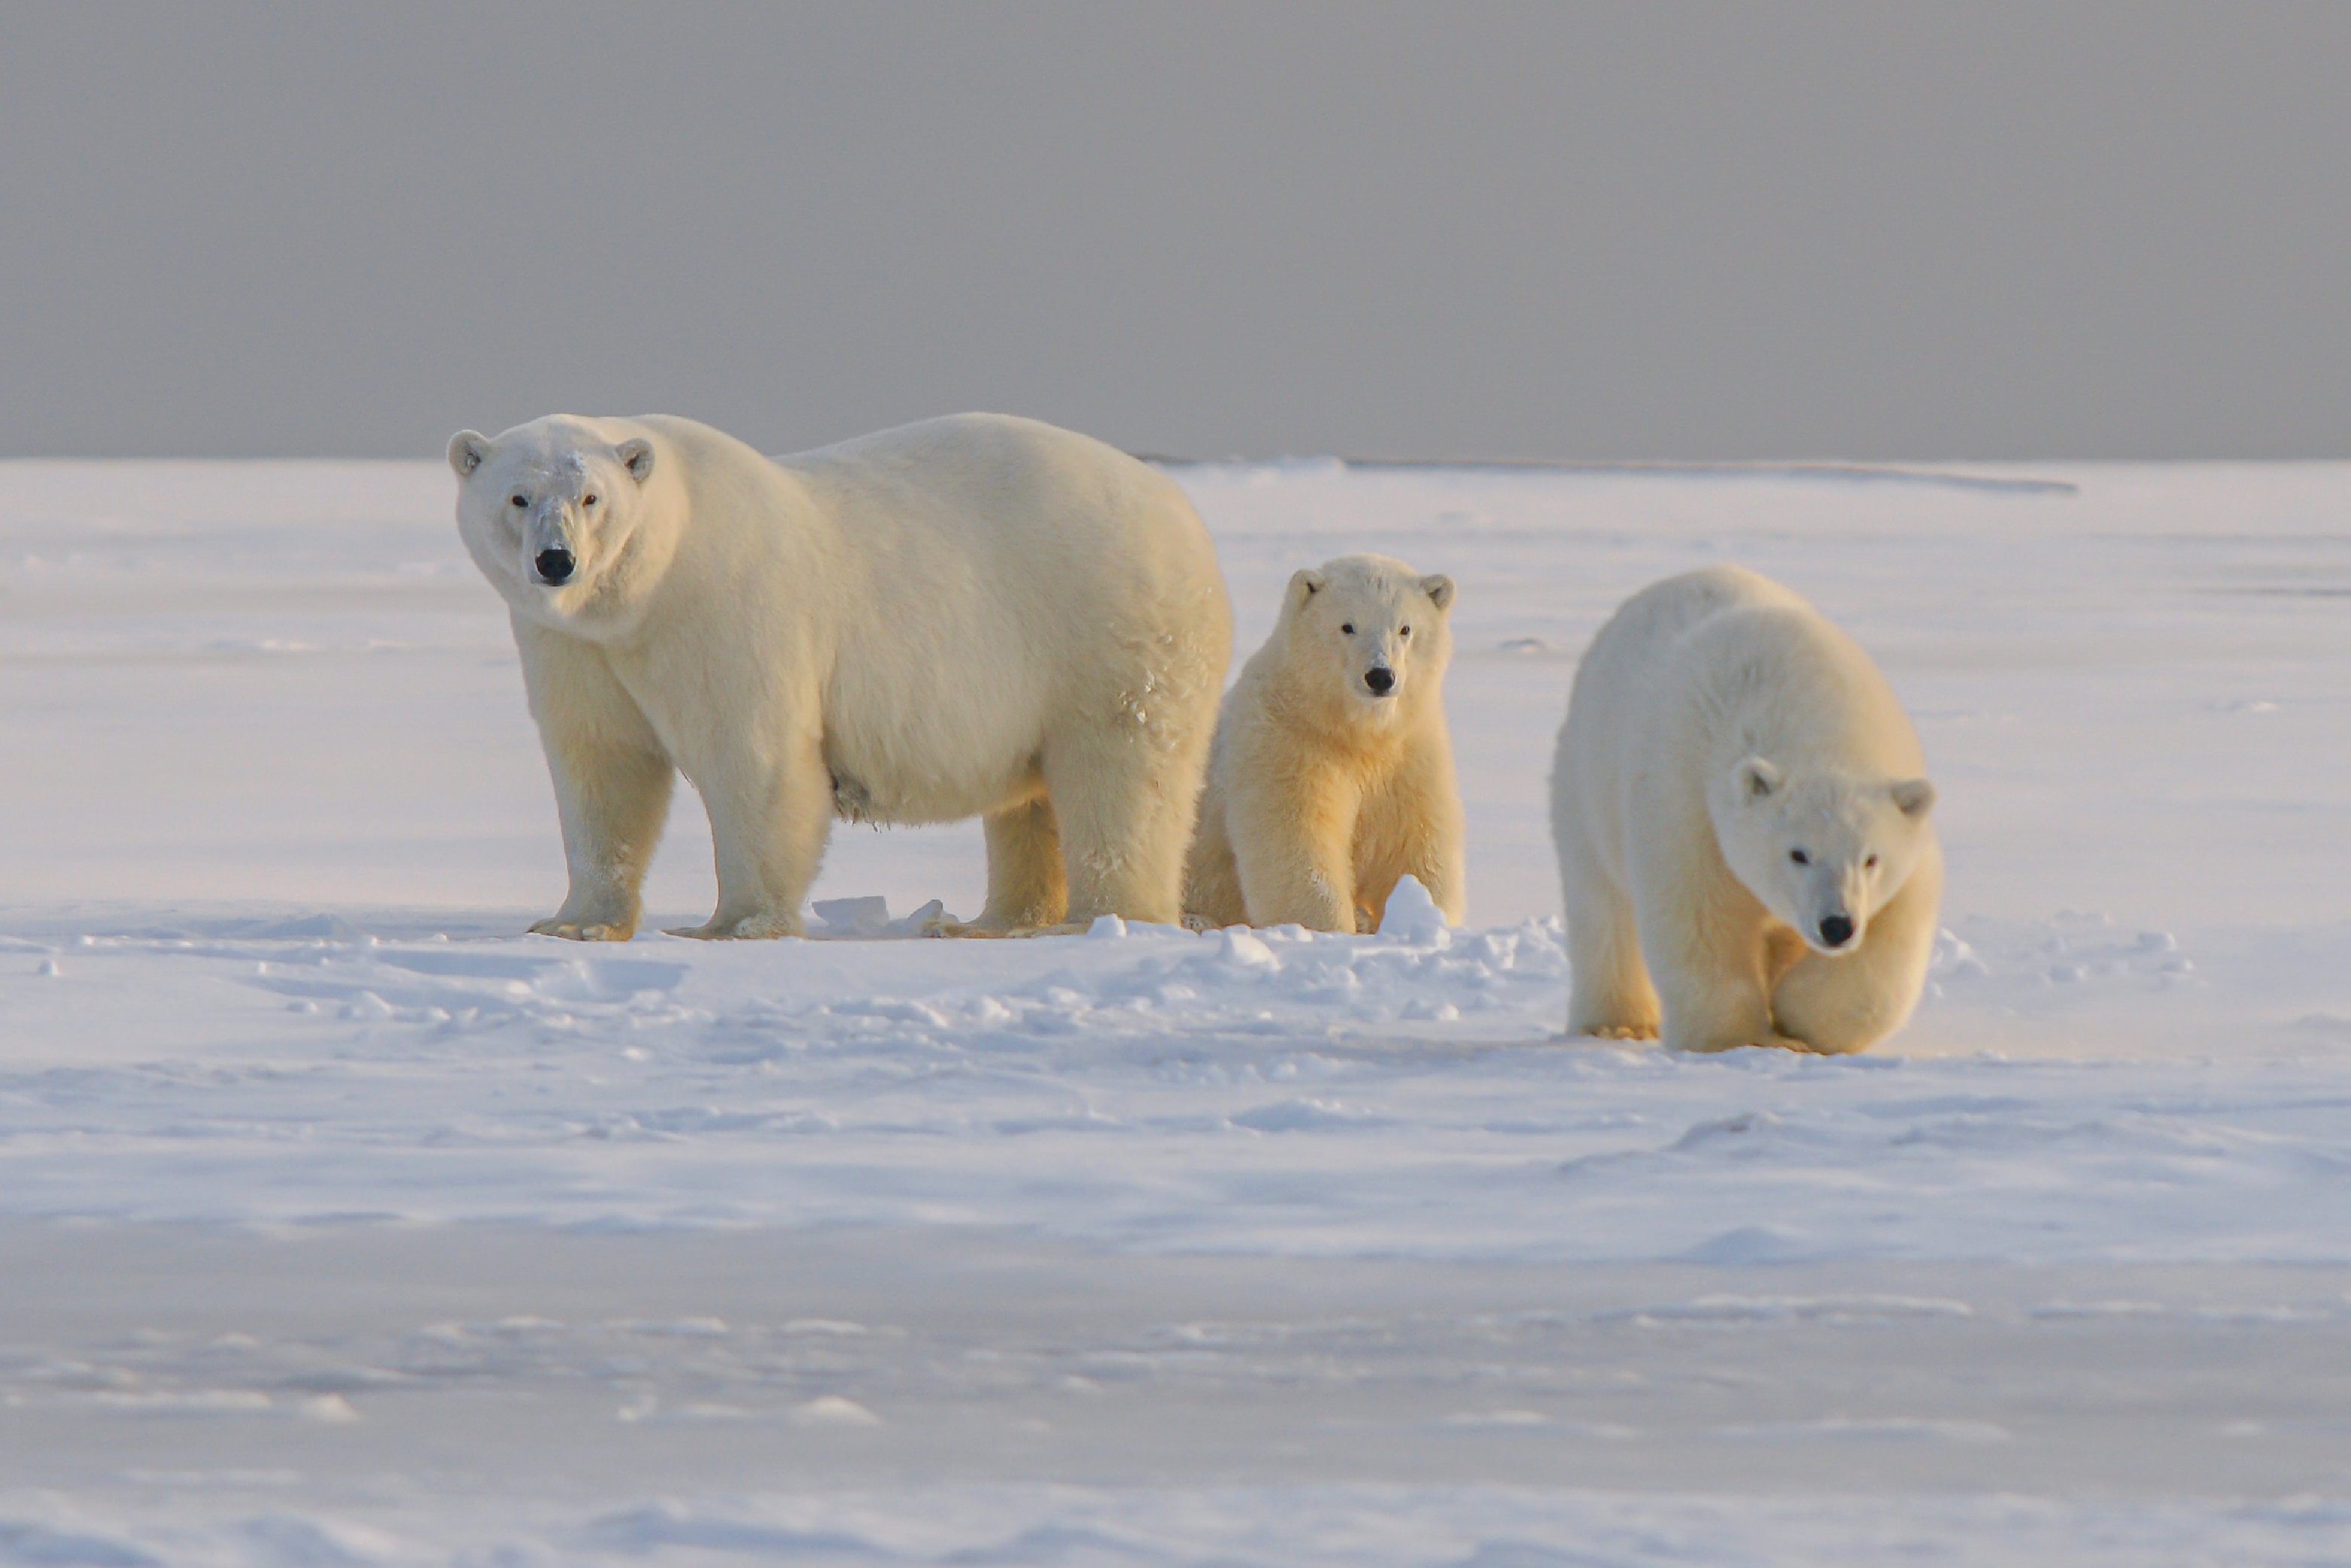 A mother polar bear stands with two cubs in the snow.